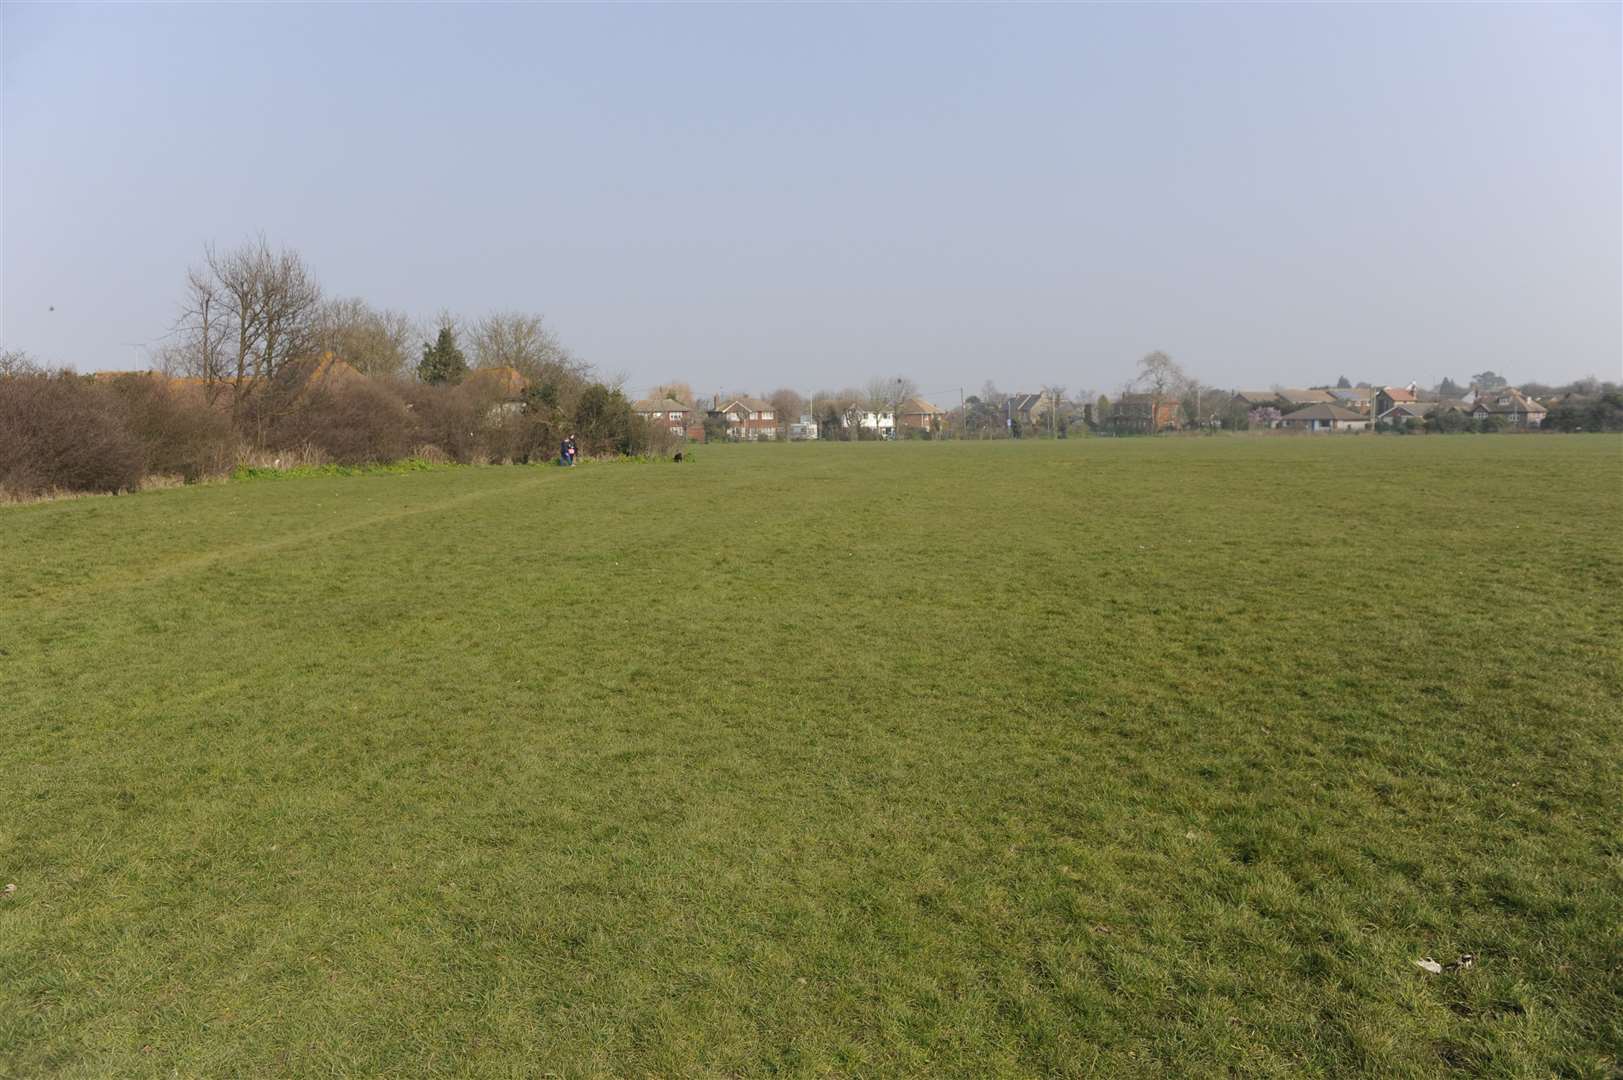 Church Street playing fields is popular with dog walkers